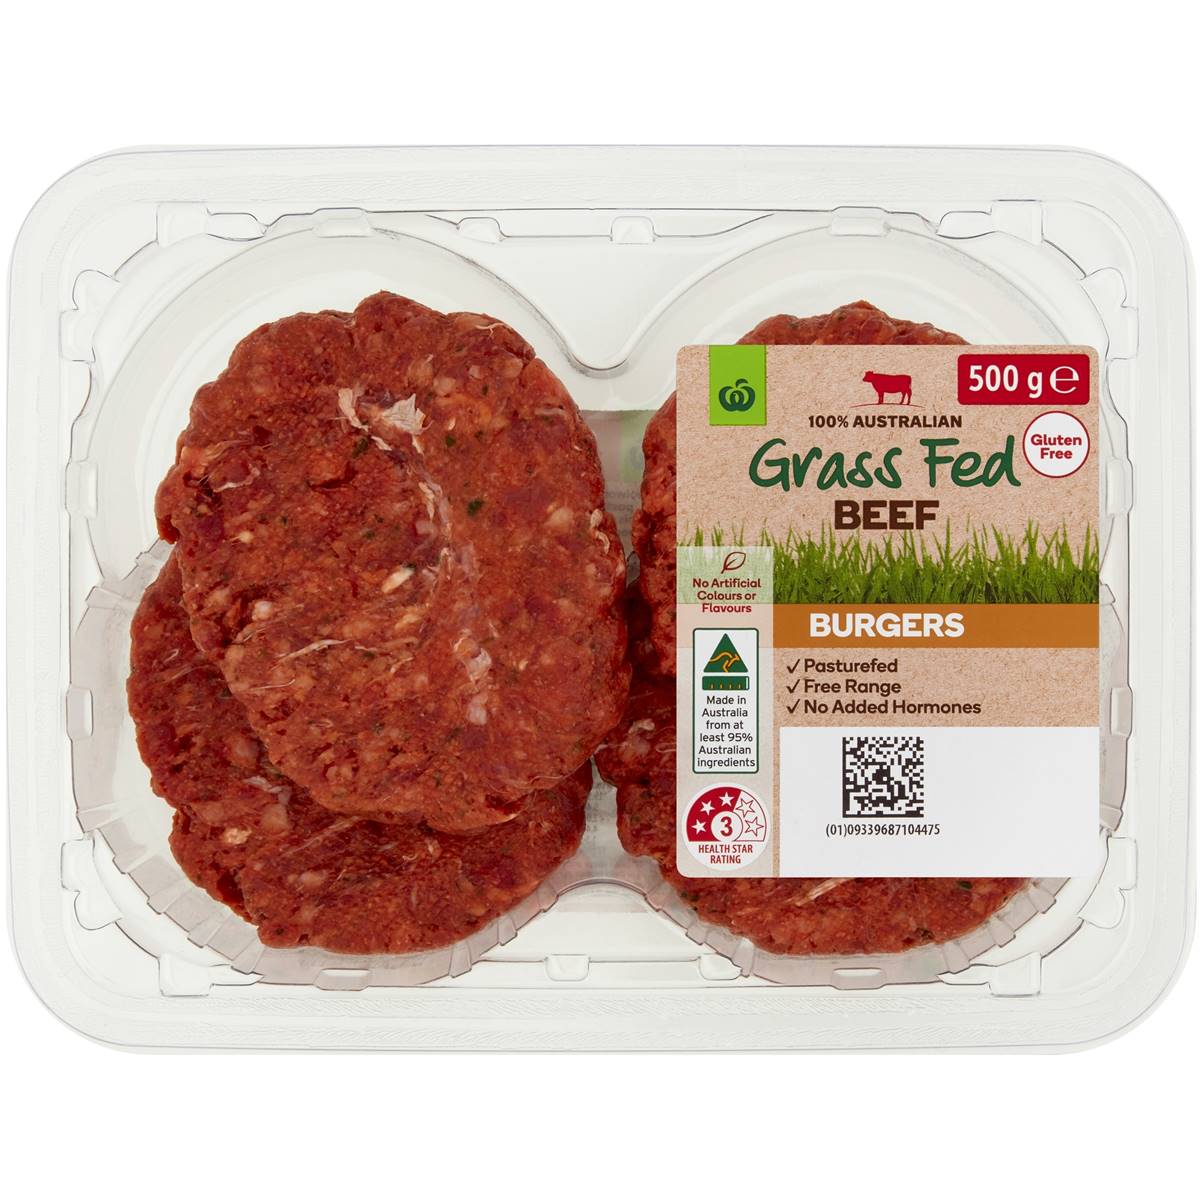 Calories in Woolworths Grass Fed Beef Burger